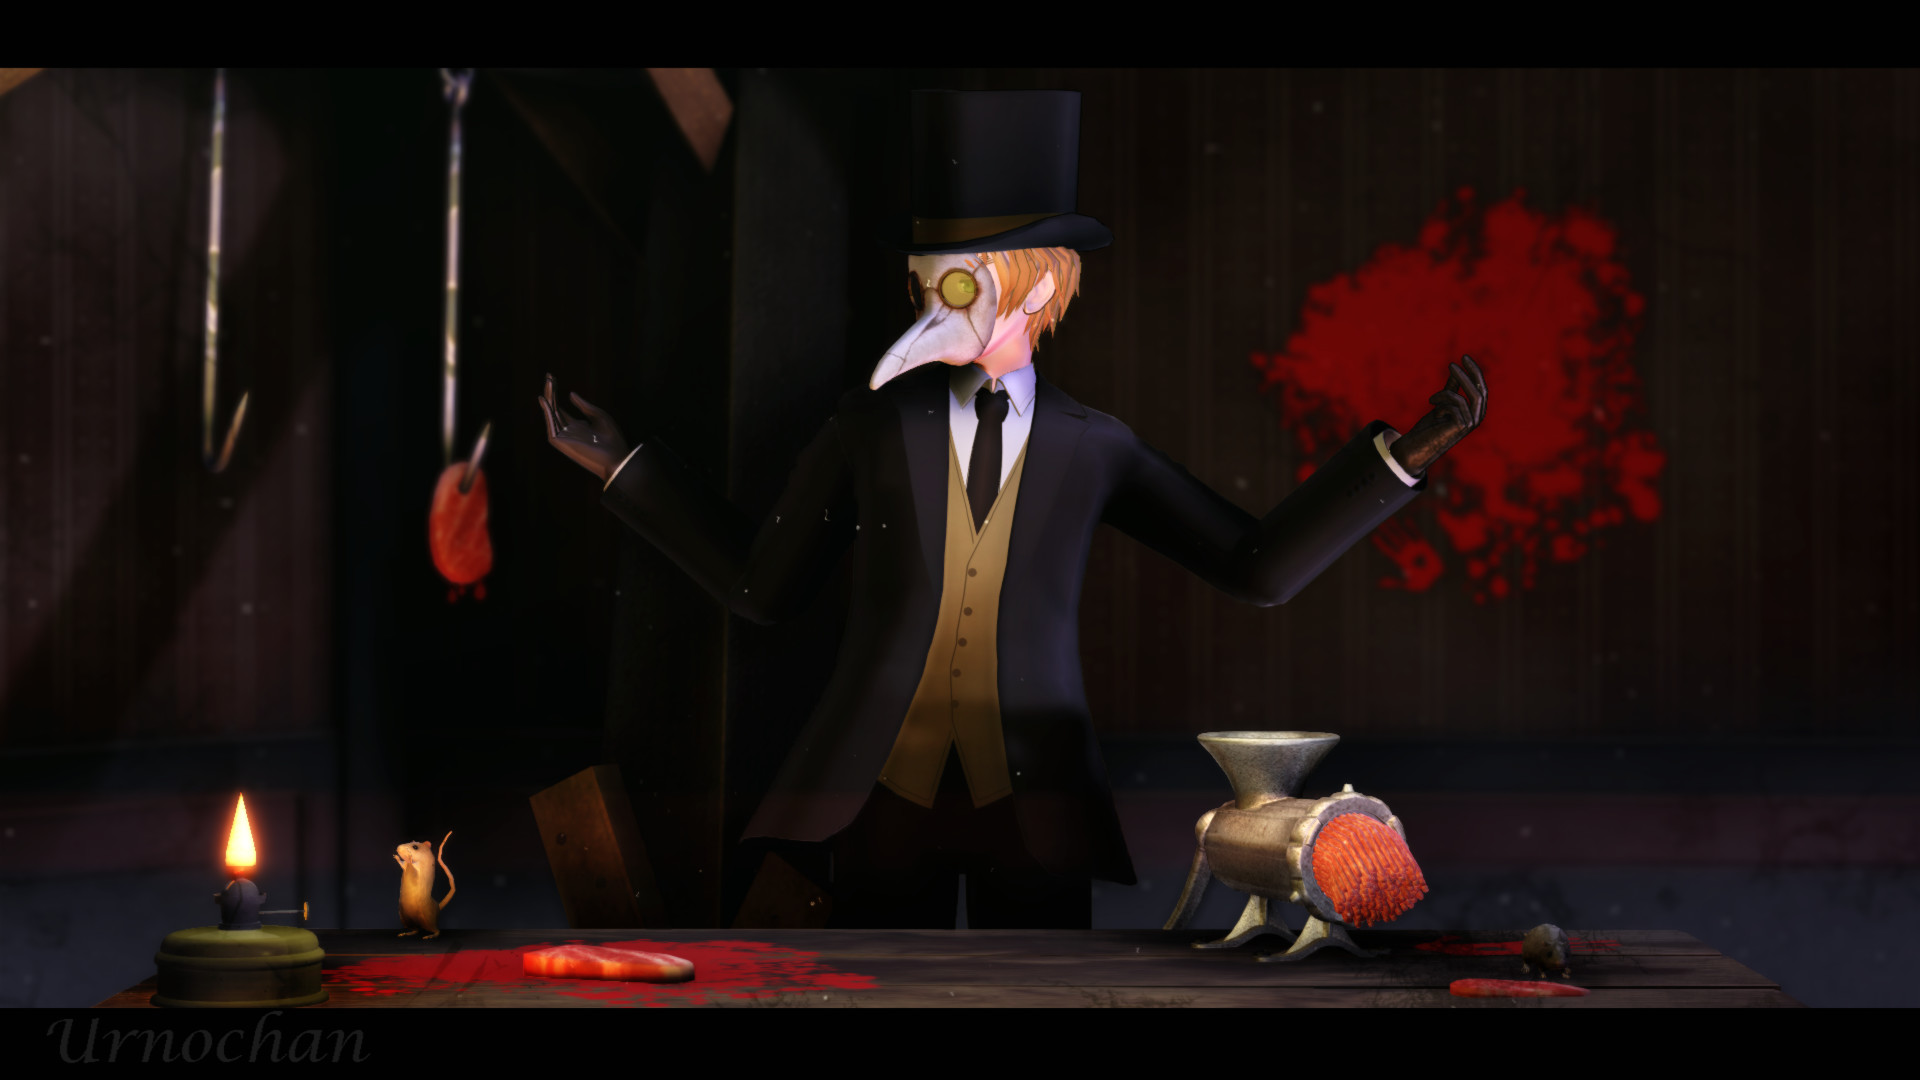 1920x1080 The Plague Doctor by Urnochan The Plague Doctor by Urnochan